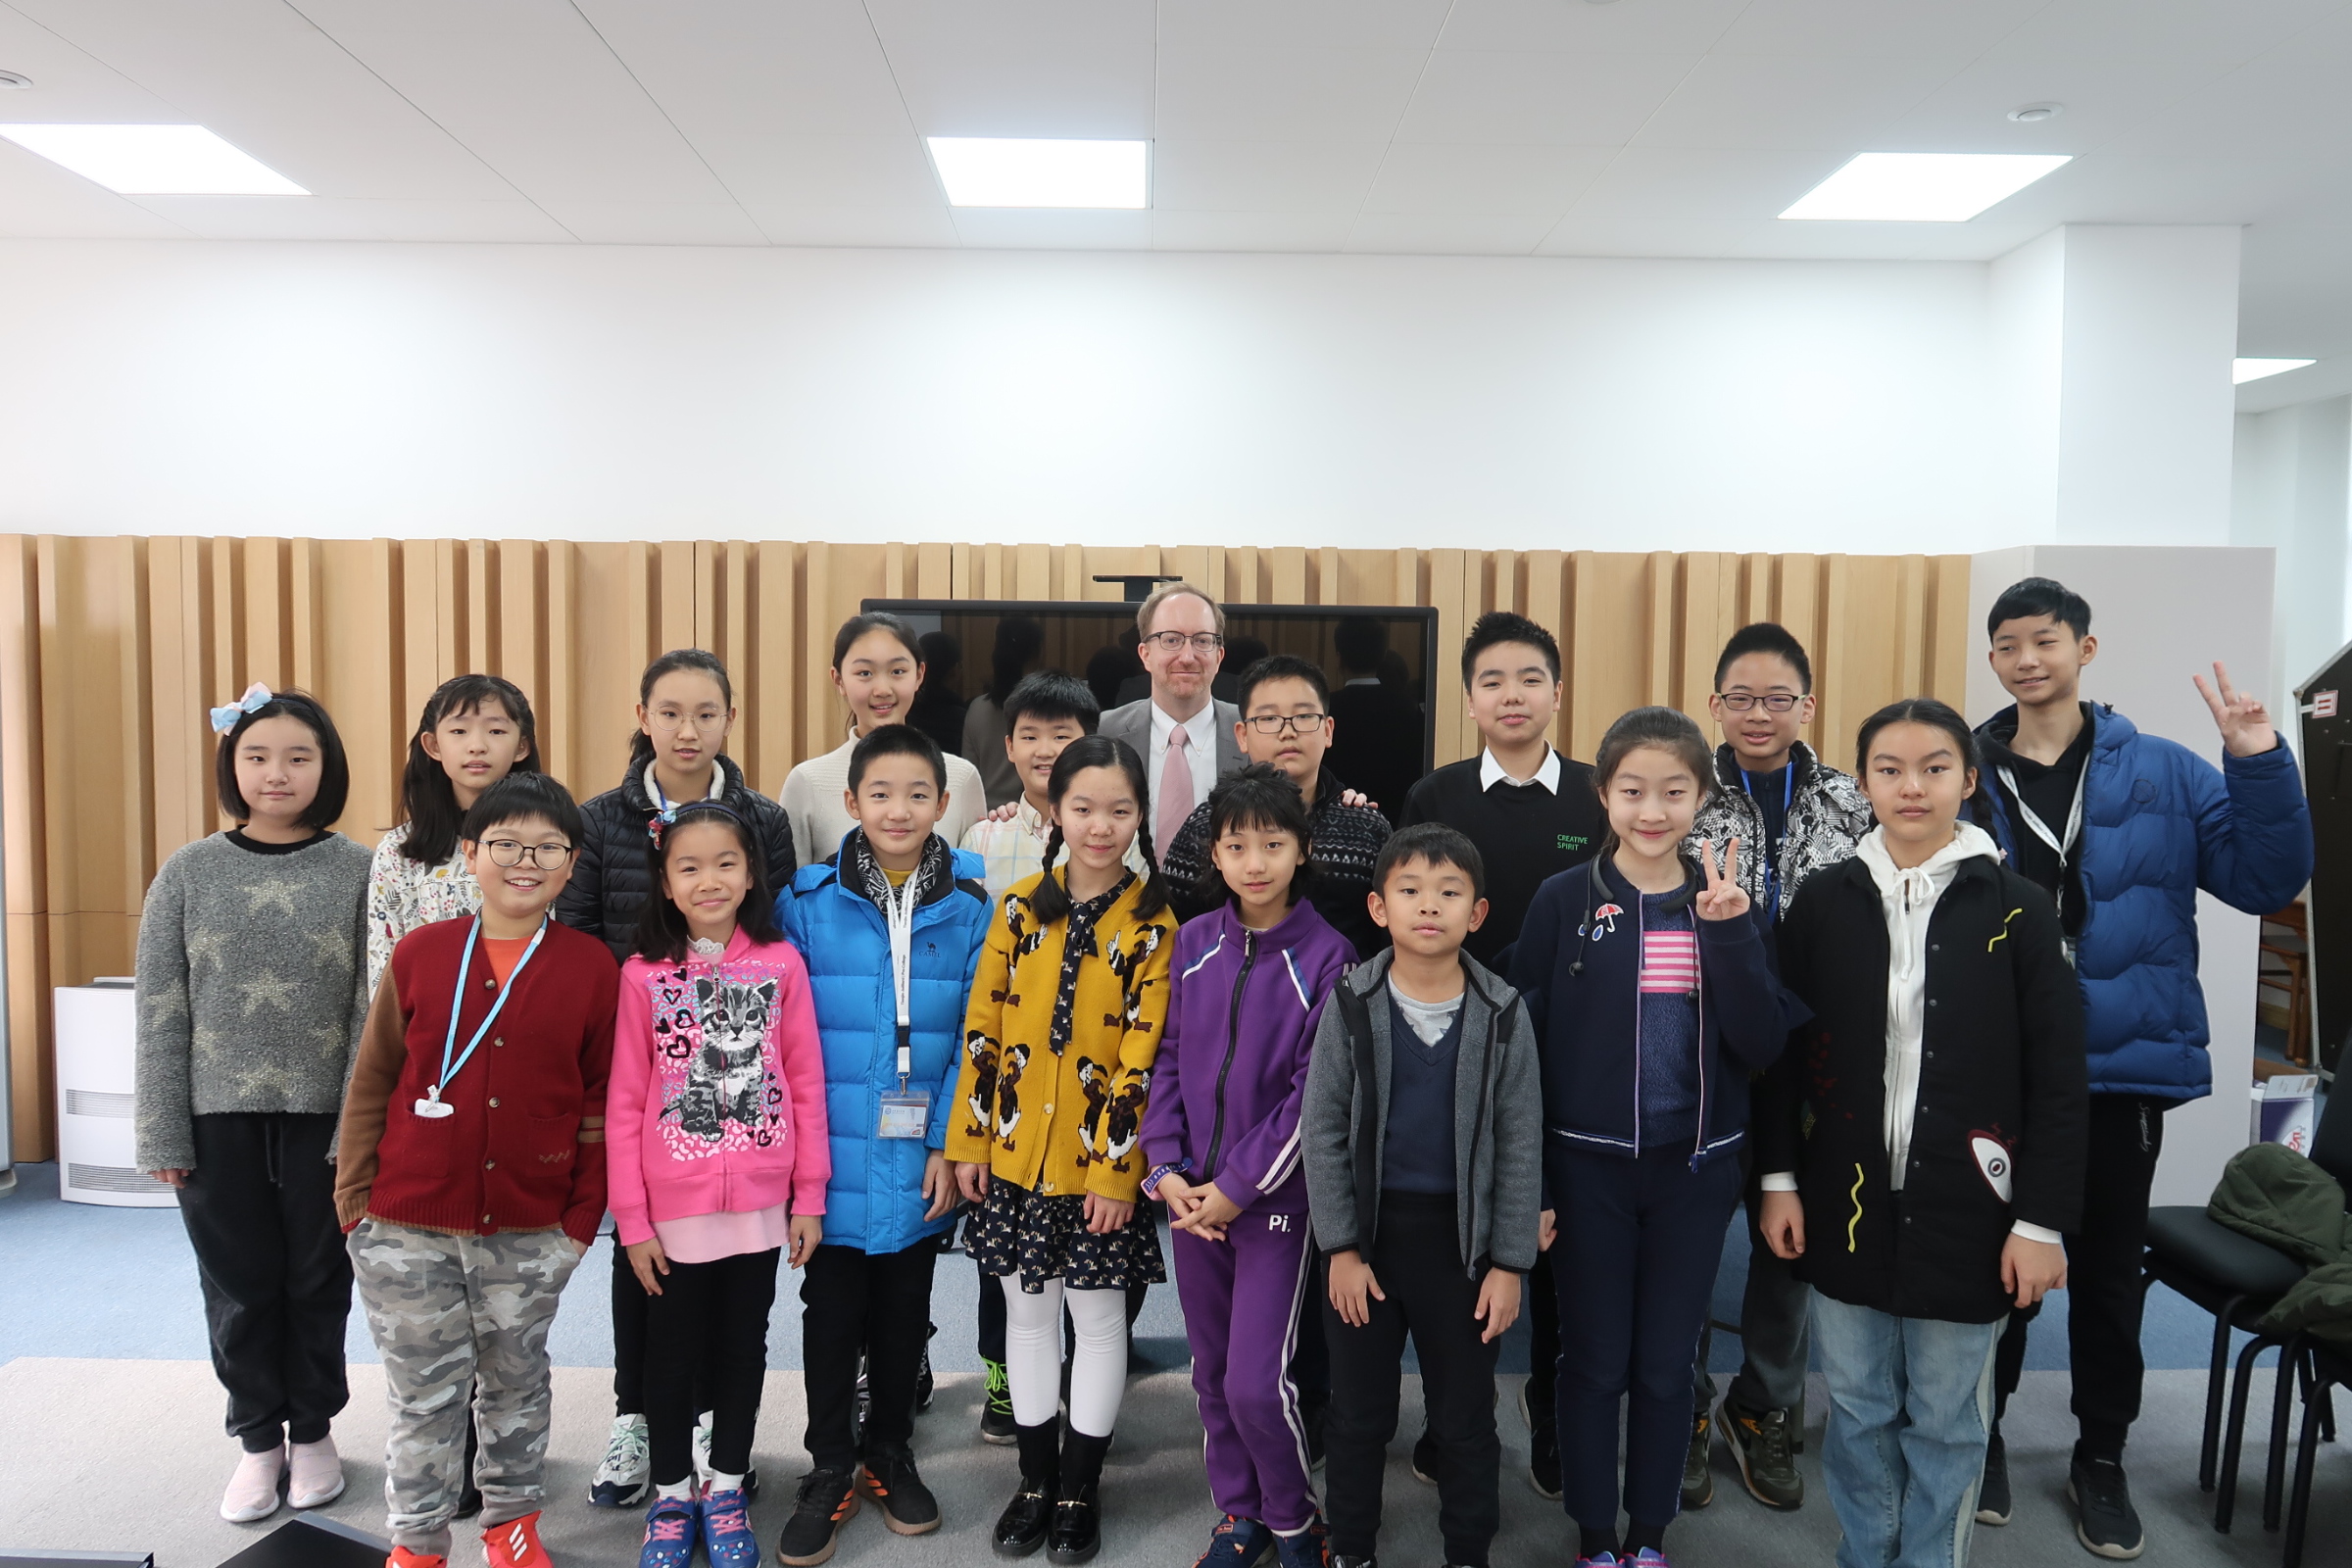 Robert Ross with Tianjin Juilliard Pre-College students in Tianjin, China. Photo credit: Sophie Zhang  